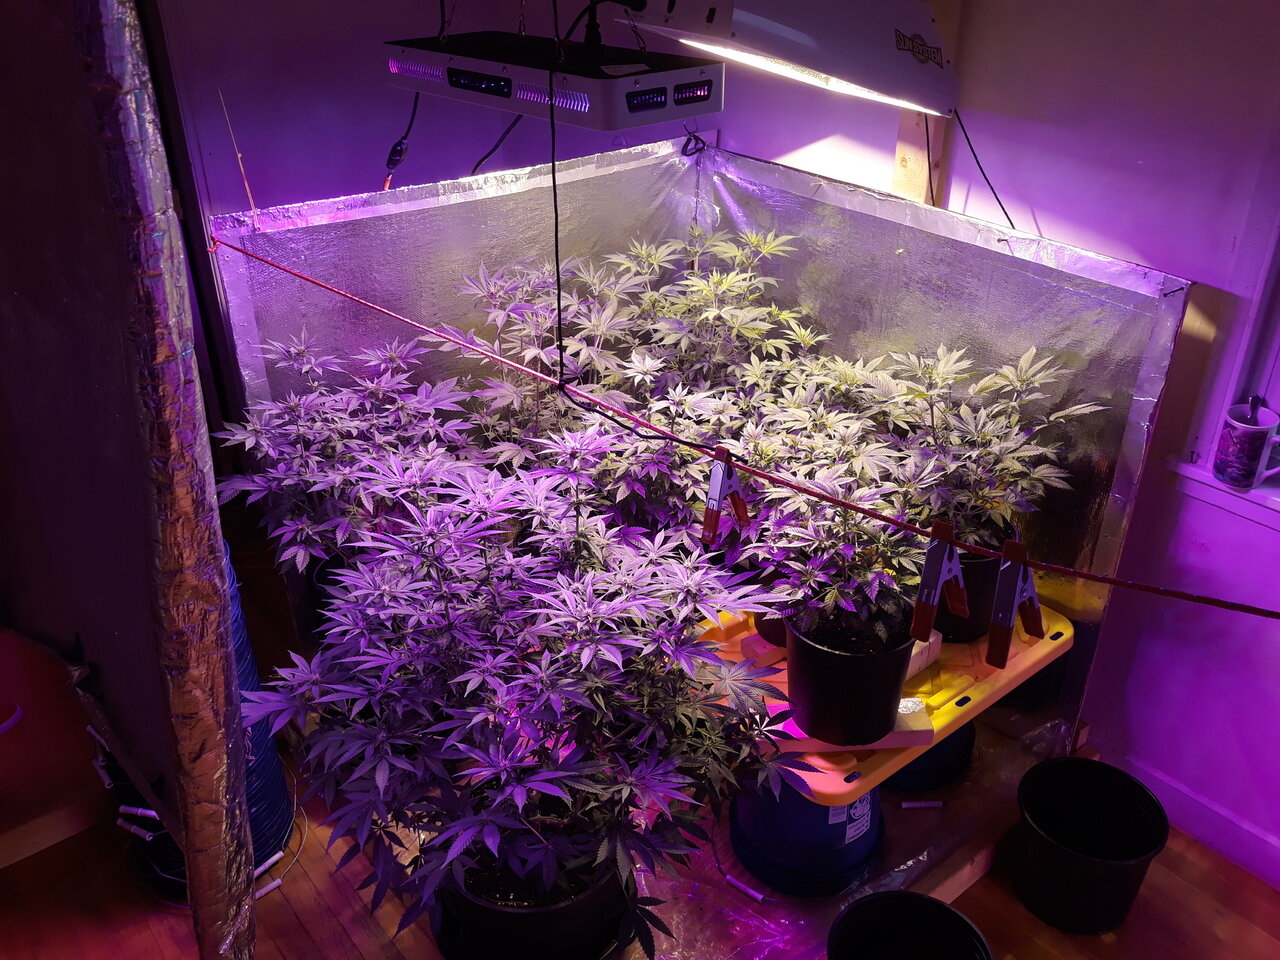 Day 20 Led and Hps.